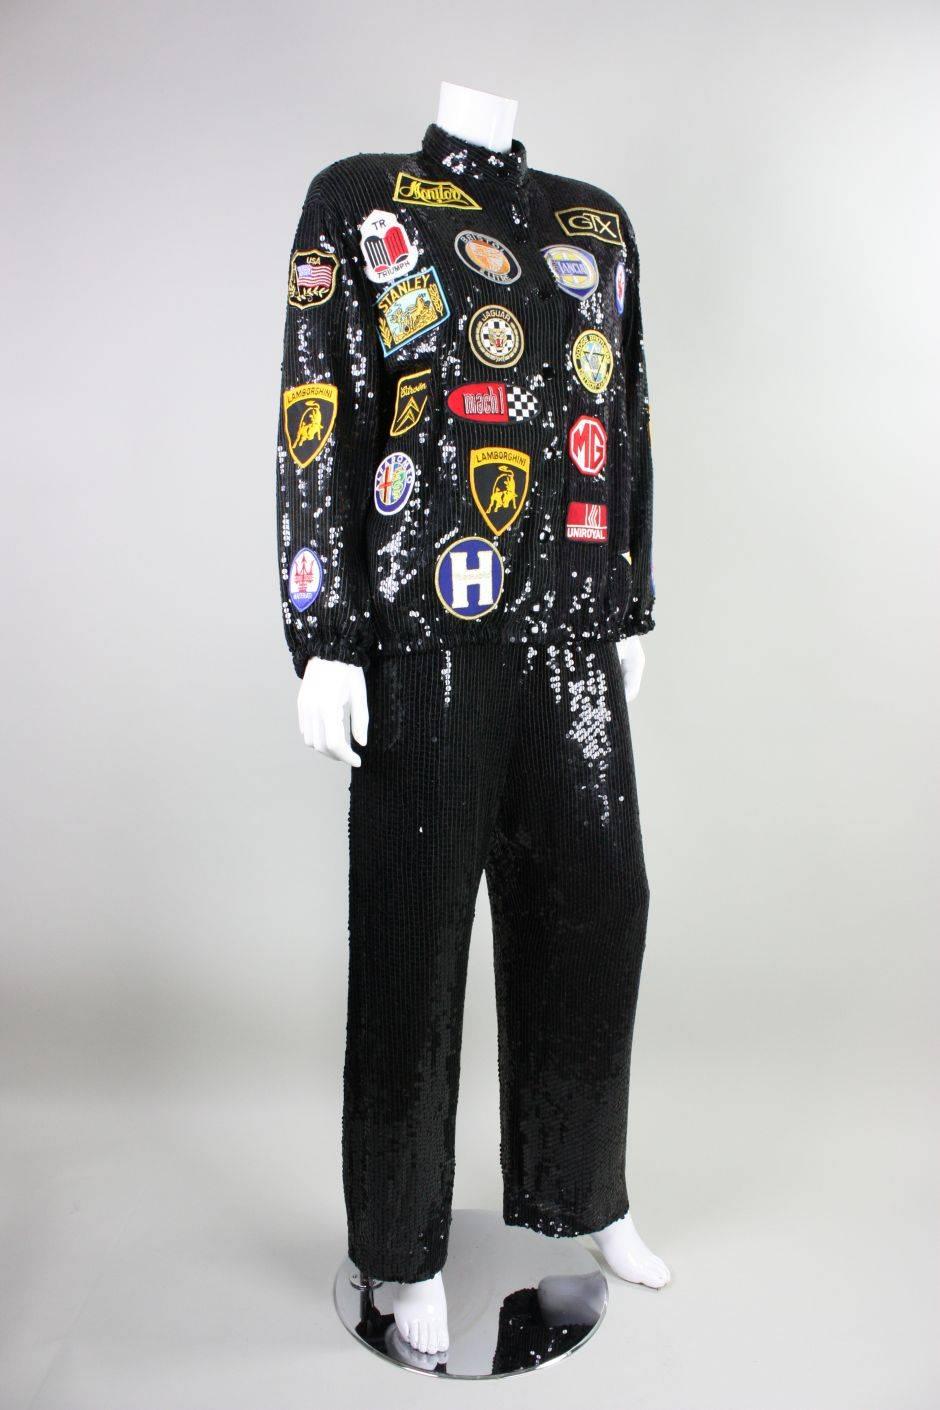 Vintage ensemble from Jeanette for St. Martin is completely covered in black sequins and dates to the 1980's.  Jacket features automotive patches that are artfully arranged on the front, sleeves, and back. It has center front snap closures and